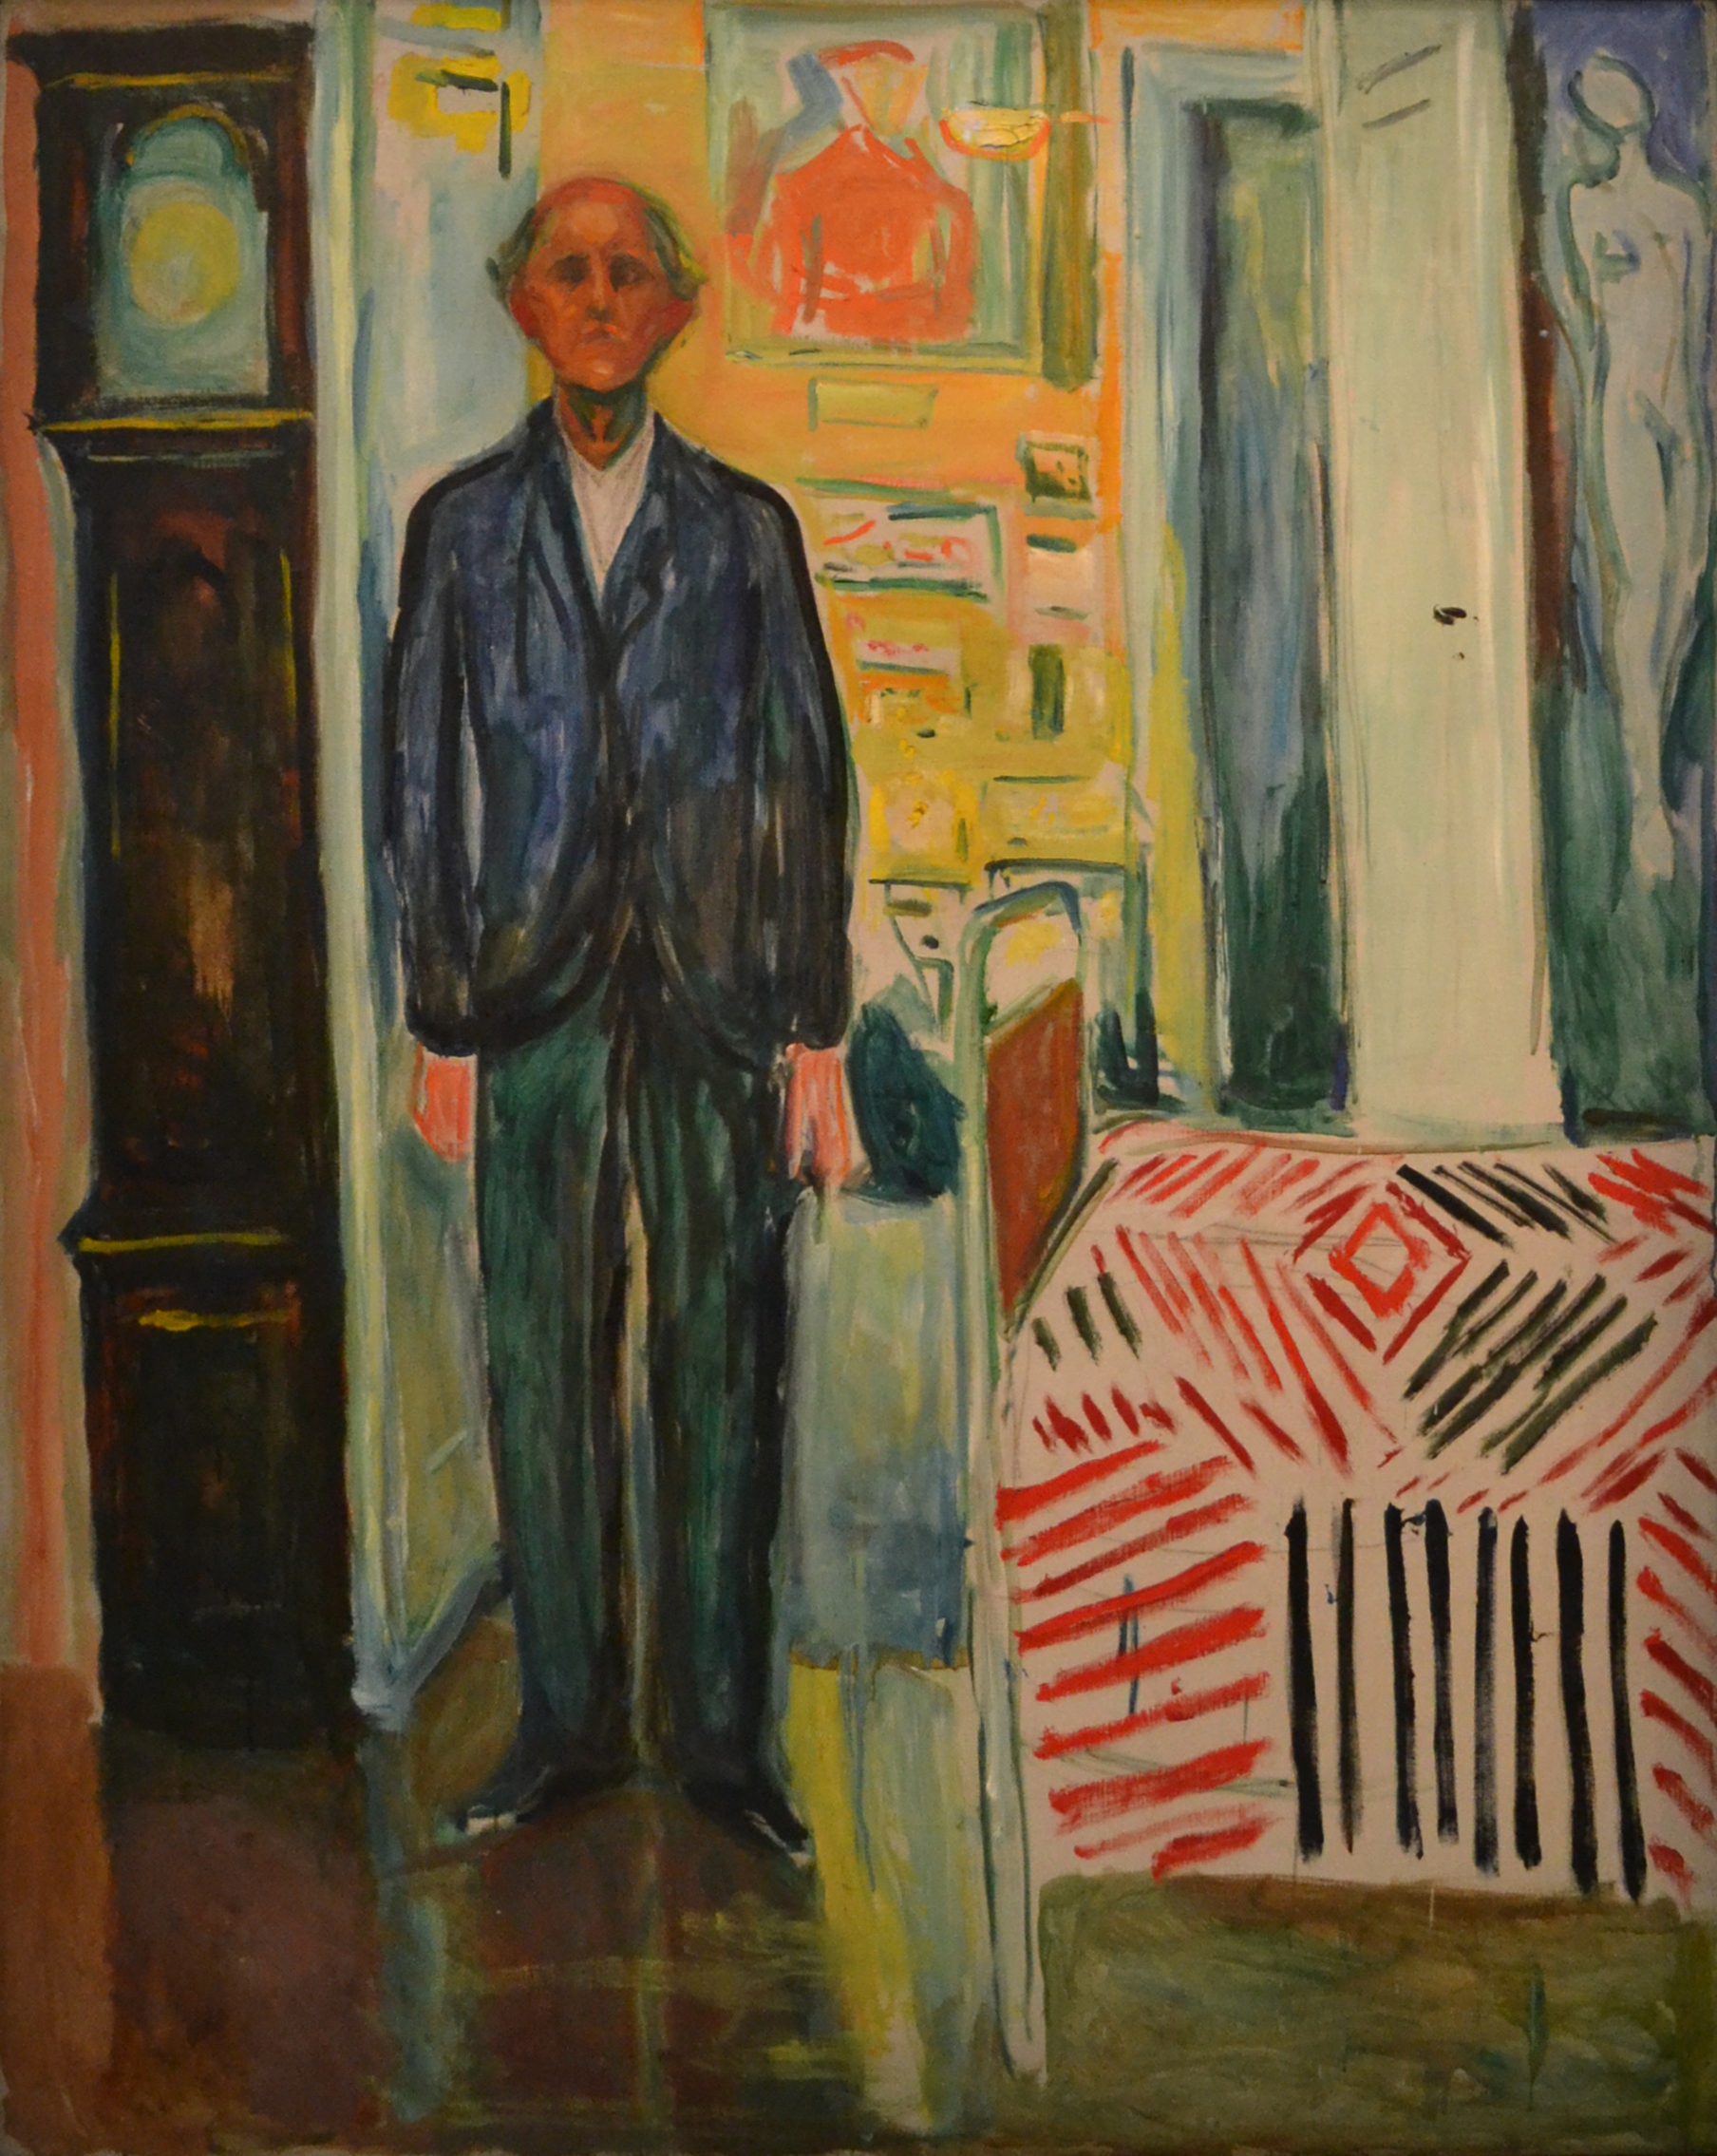 Edvard Munch: Self-Portrait. Between the Clock and the Bed. Oil on canvas, 1940-43. Photo © Munchmuseet